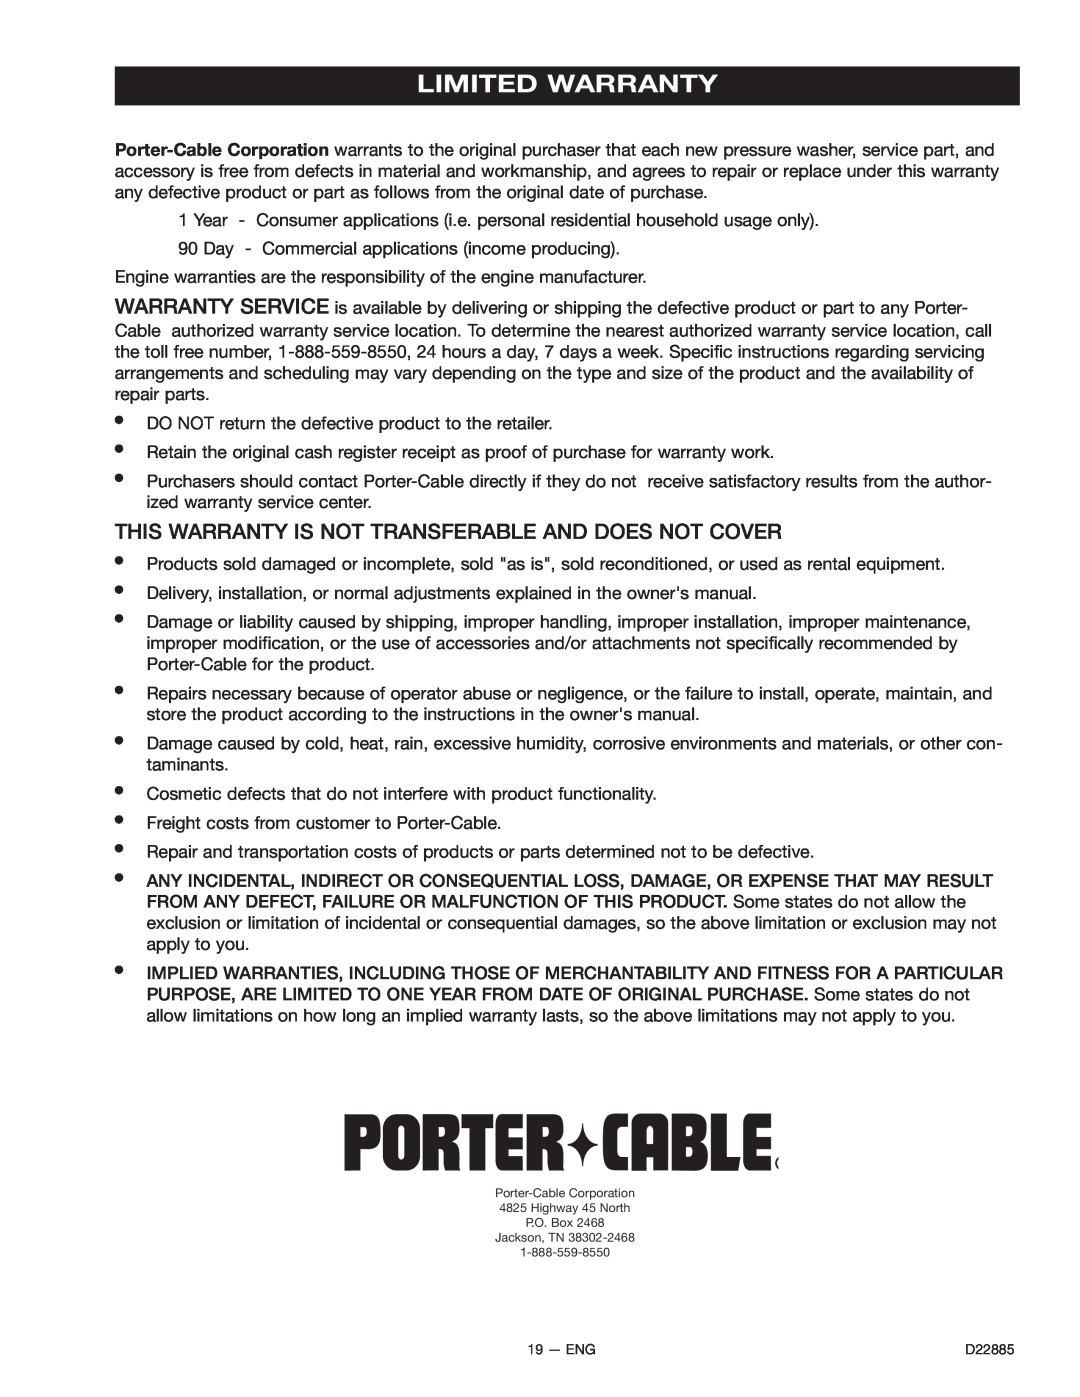 Porter-Cable PCH2425, PCV2021, PCH3030, PCH3540HR Limited Warranty, This Warranty Is Not Transferable And Does Not Cover 